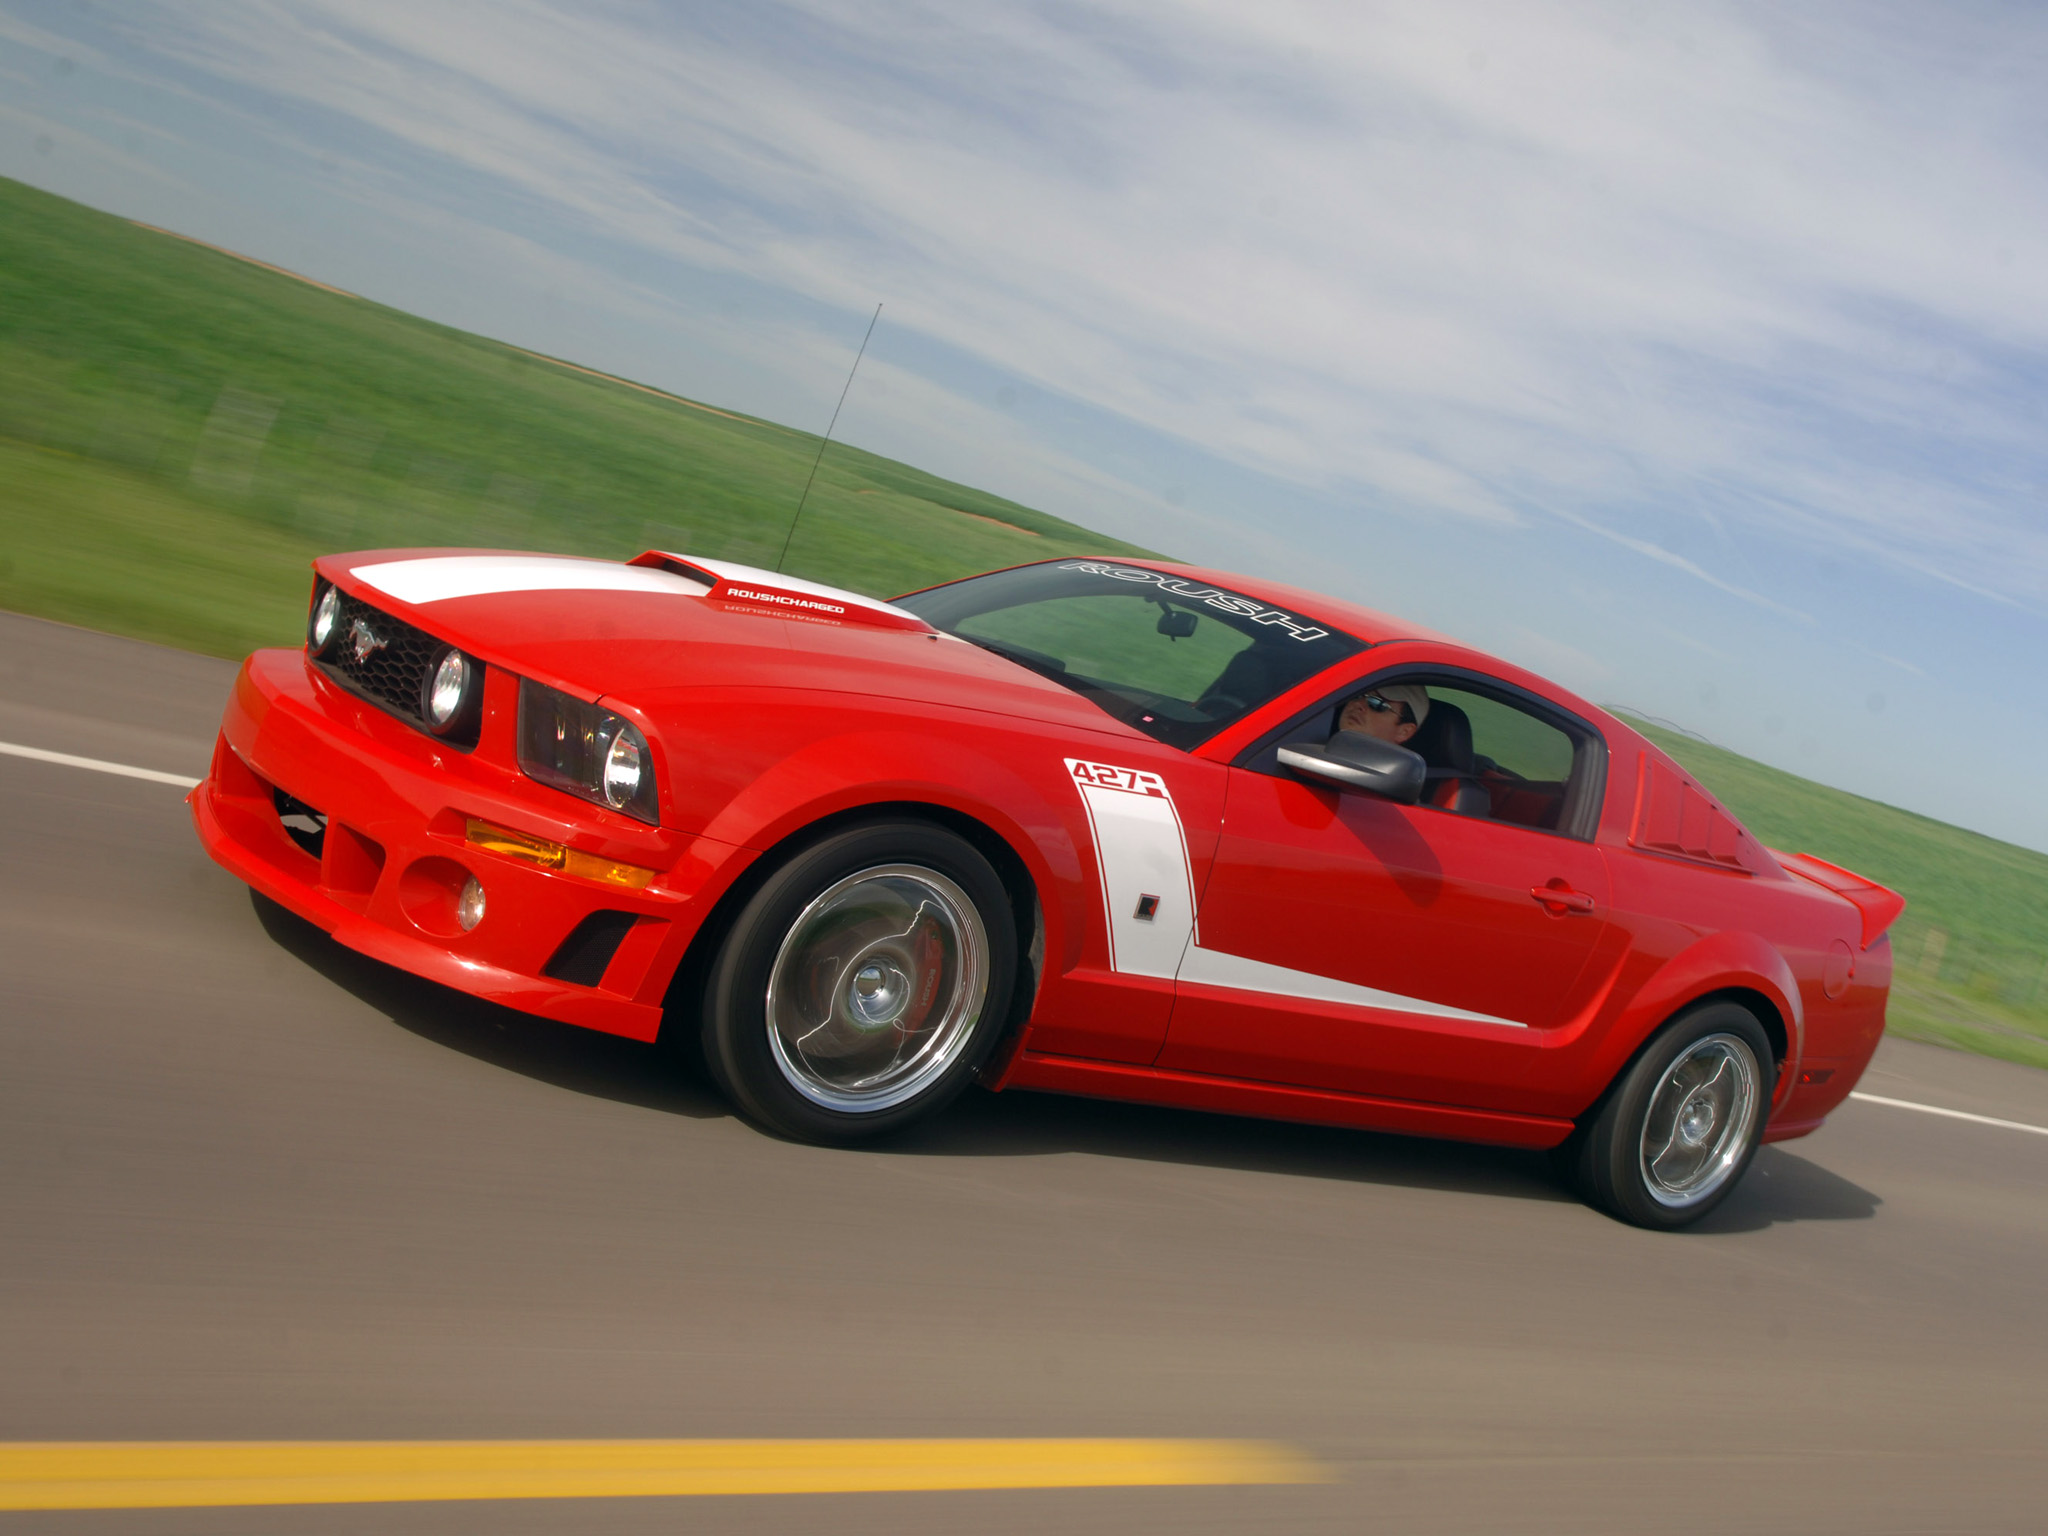 2009, Roush, Ford, Mustang, 427r, Muscle, Tuning, Hot, Rod, Rods, Hs Wallpaper